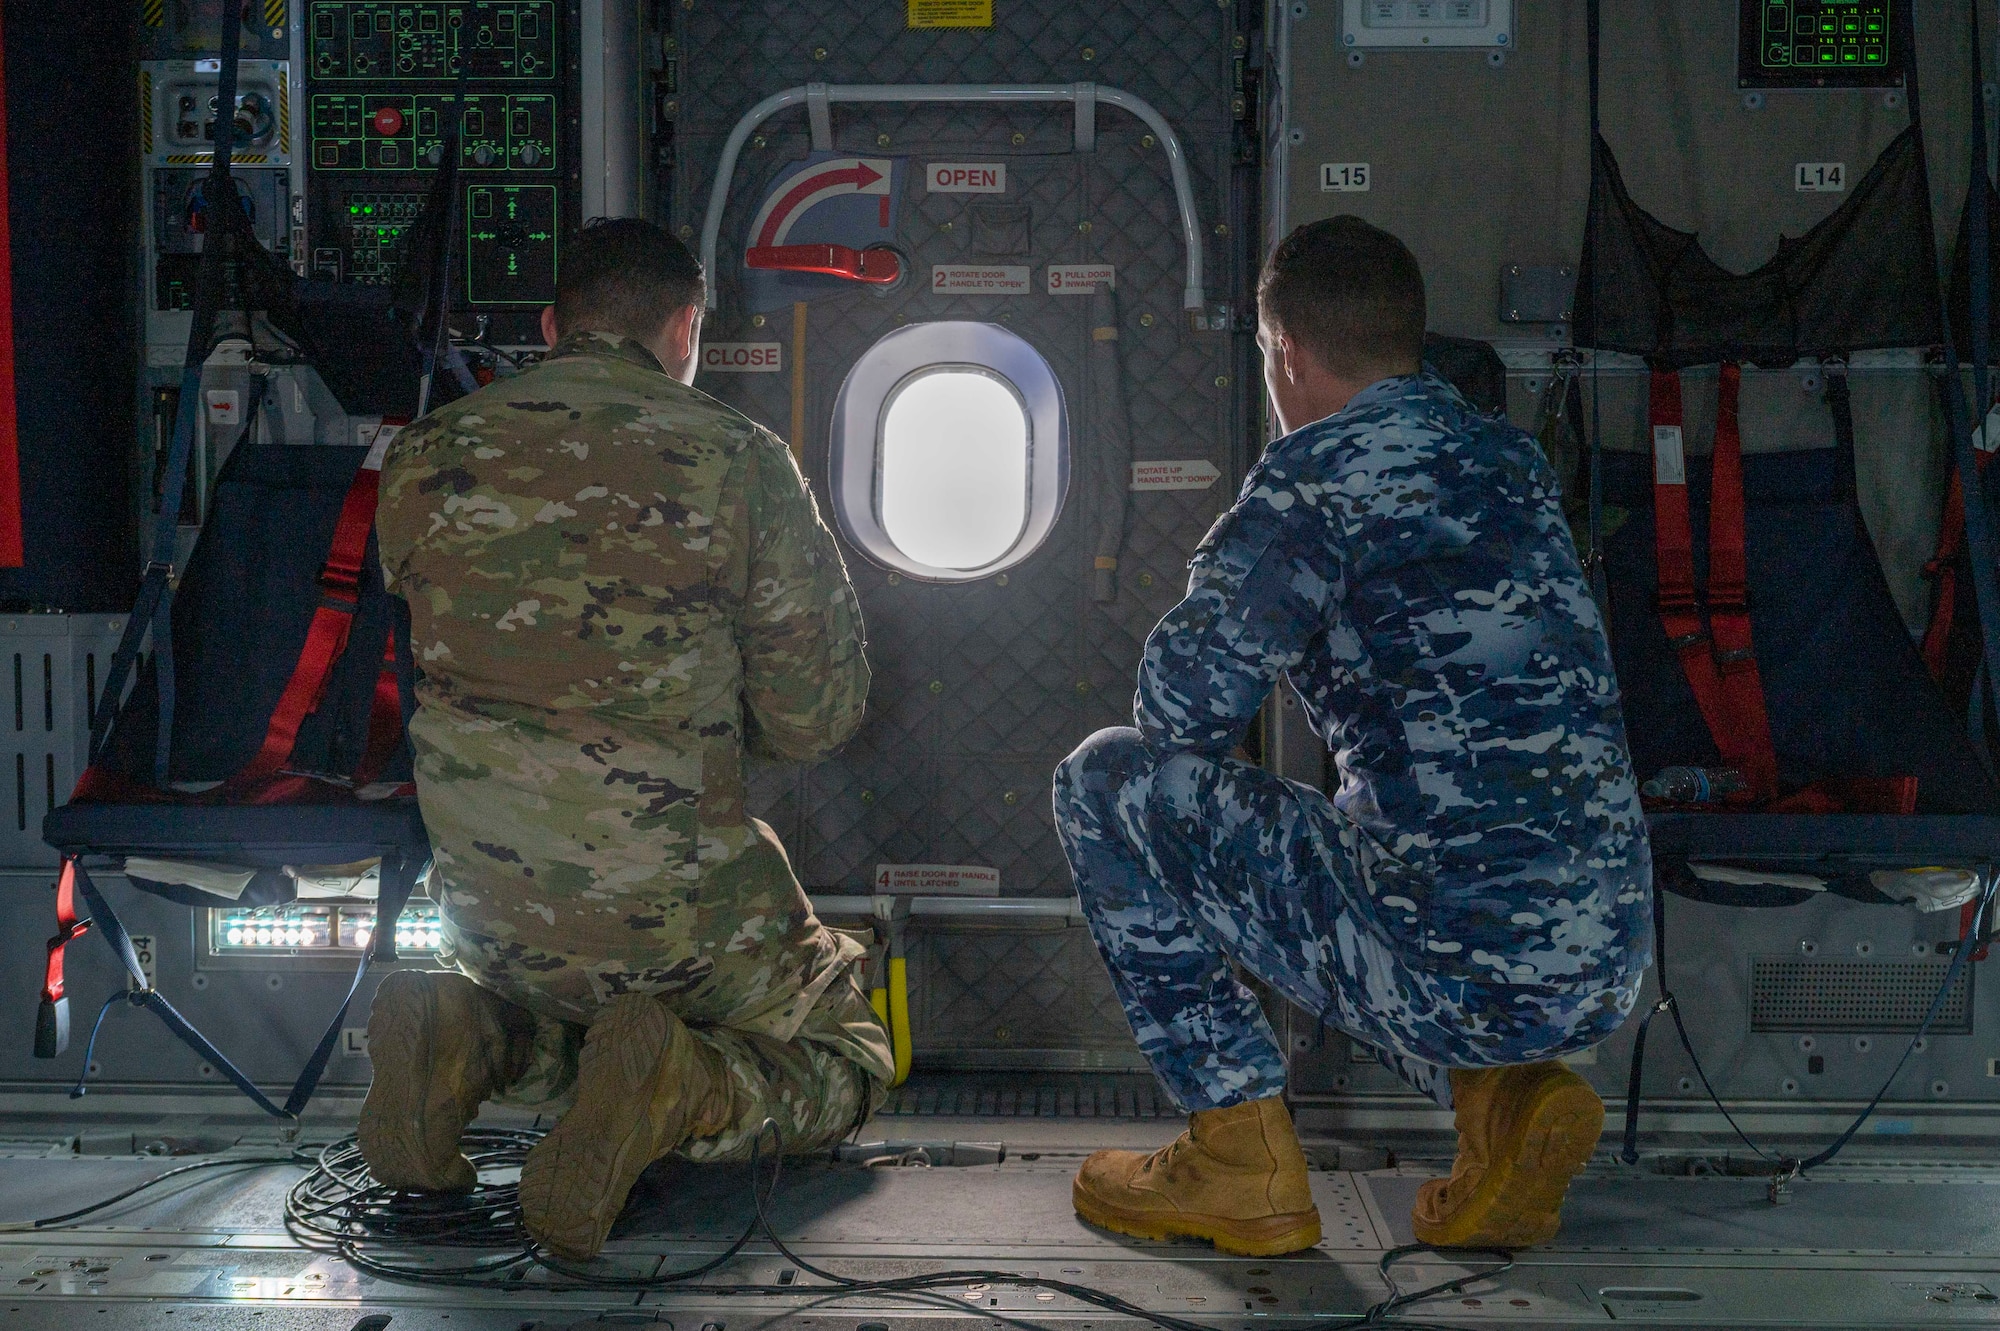 A U.S. Air Force Airman and a Royal Australian Air Force aviator look out the window of a Royal Air Force A400M Atlas during a familiarization flight over Hawaii during Mobility Guardian 23, July 10, 2023. MG23 features seven participating countries - Australia, Canada, France, Japan, New Zealand, United Kingdom, and the United States - operating approximately 70 mobility aircraft across multiple locations spanning a 3,000 mile exercise area. Our Allies and partners are one of our greatest strengths and a key strategic advantage. MG23 is an opportunity to deepen our connections with regional Allies and partners using bold initiatives. (U.S. Air Force photo by Senior Airman Tiffany Del Oso)